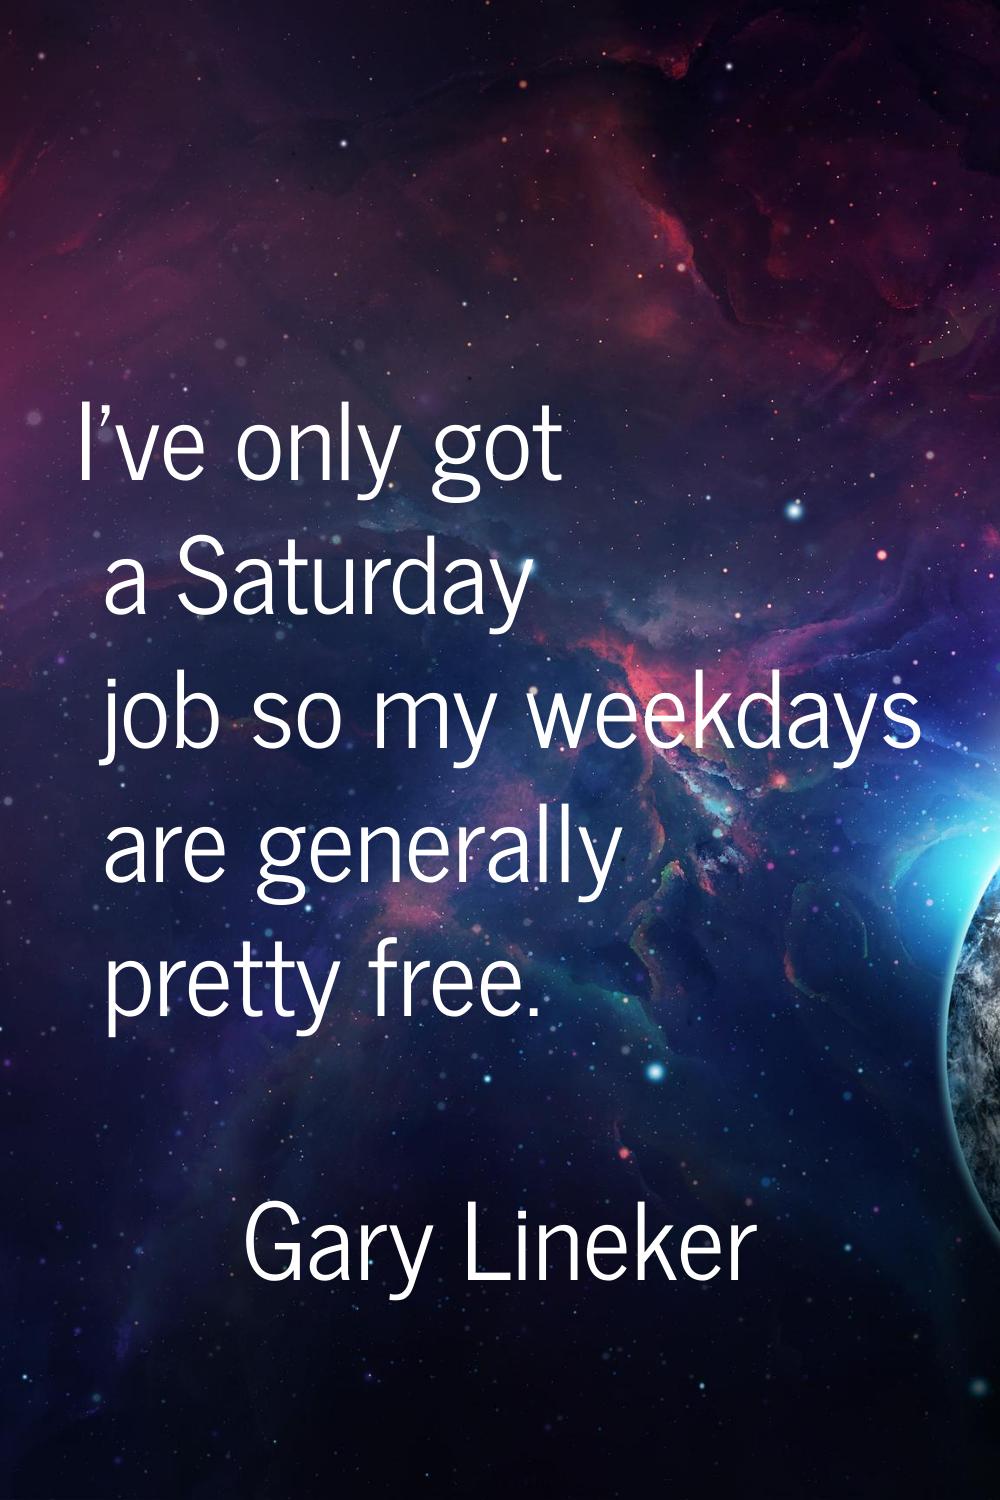 I've only got a Saturday job so my weekdays are generally pretty free.